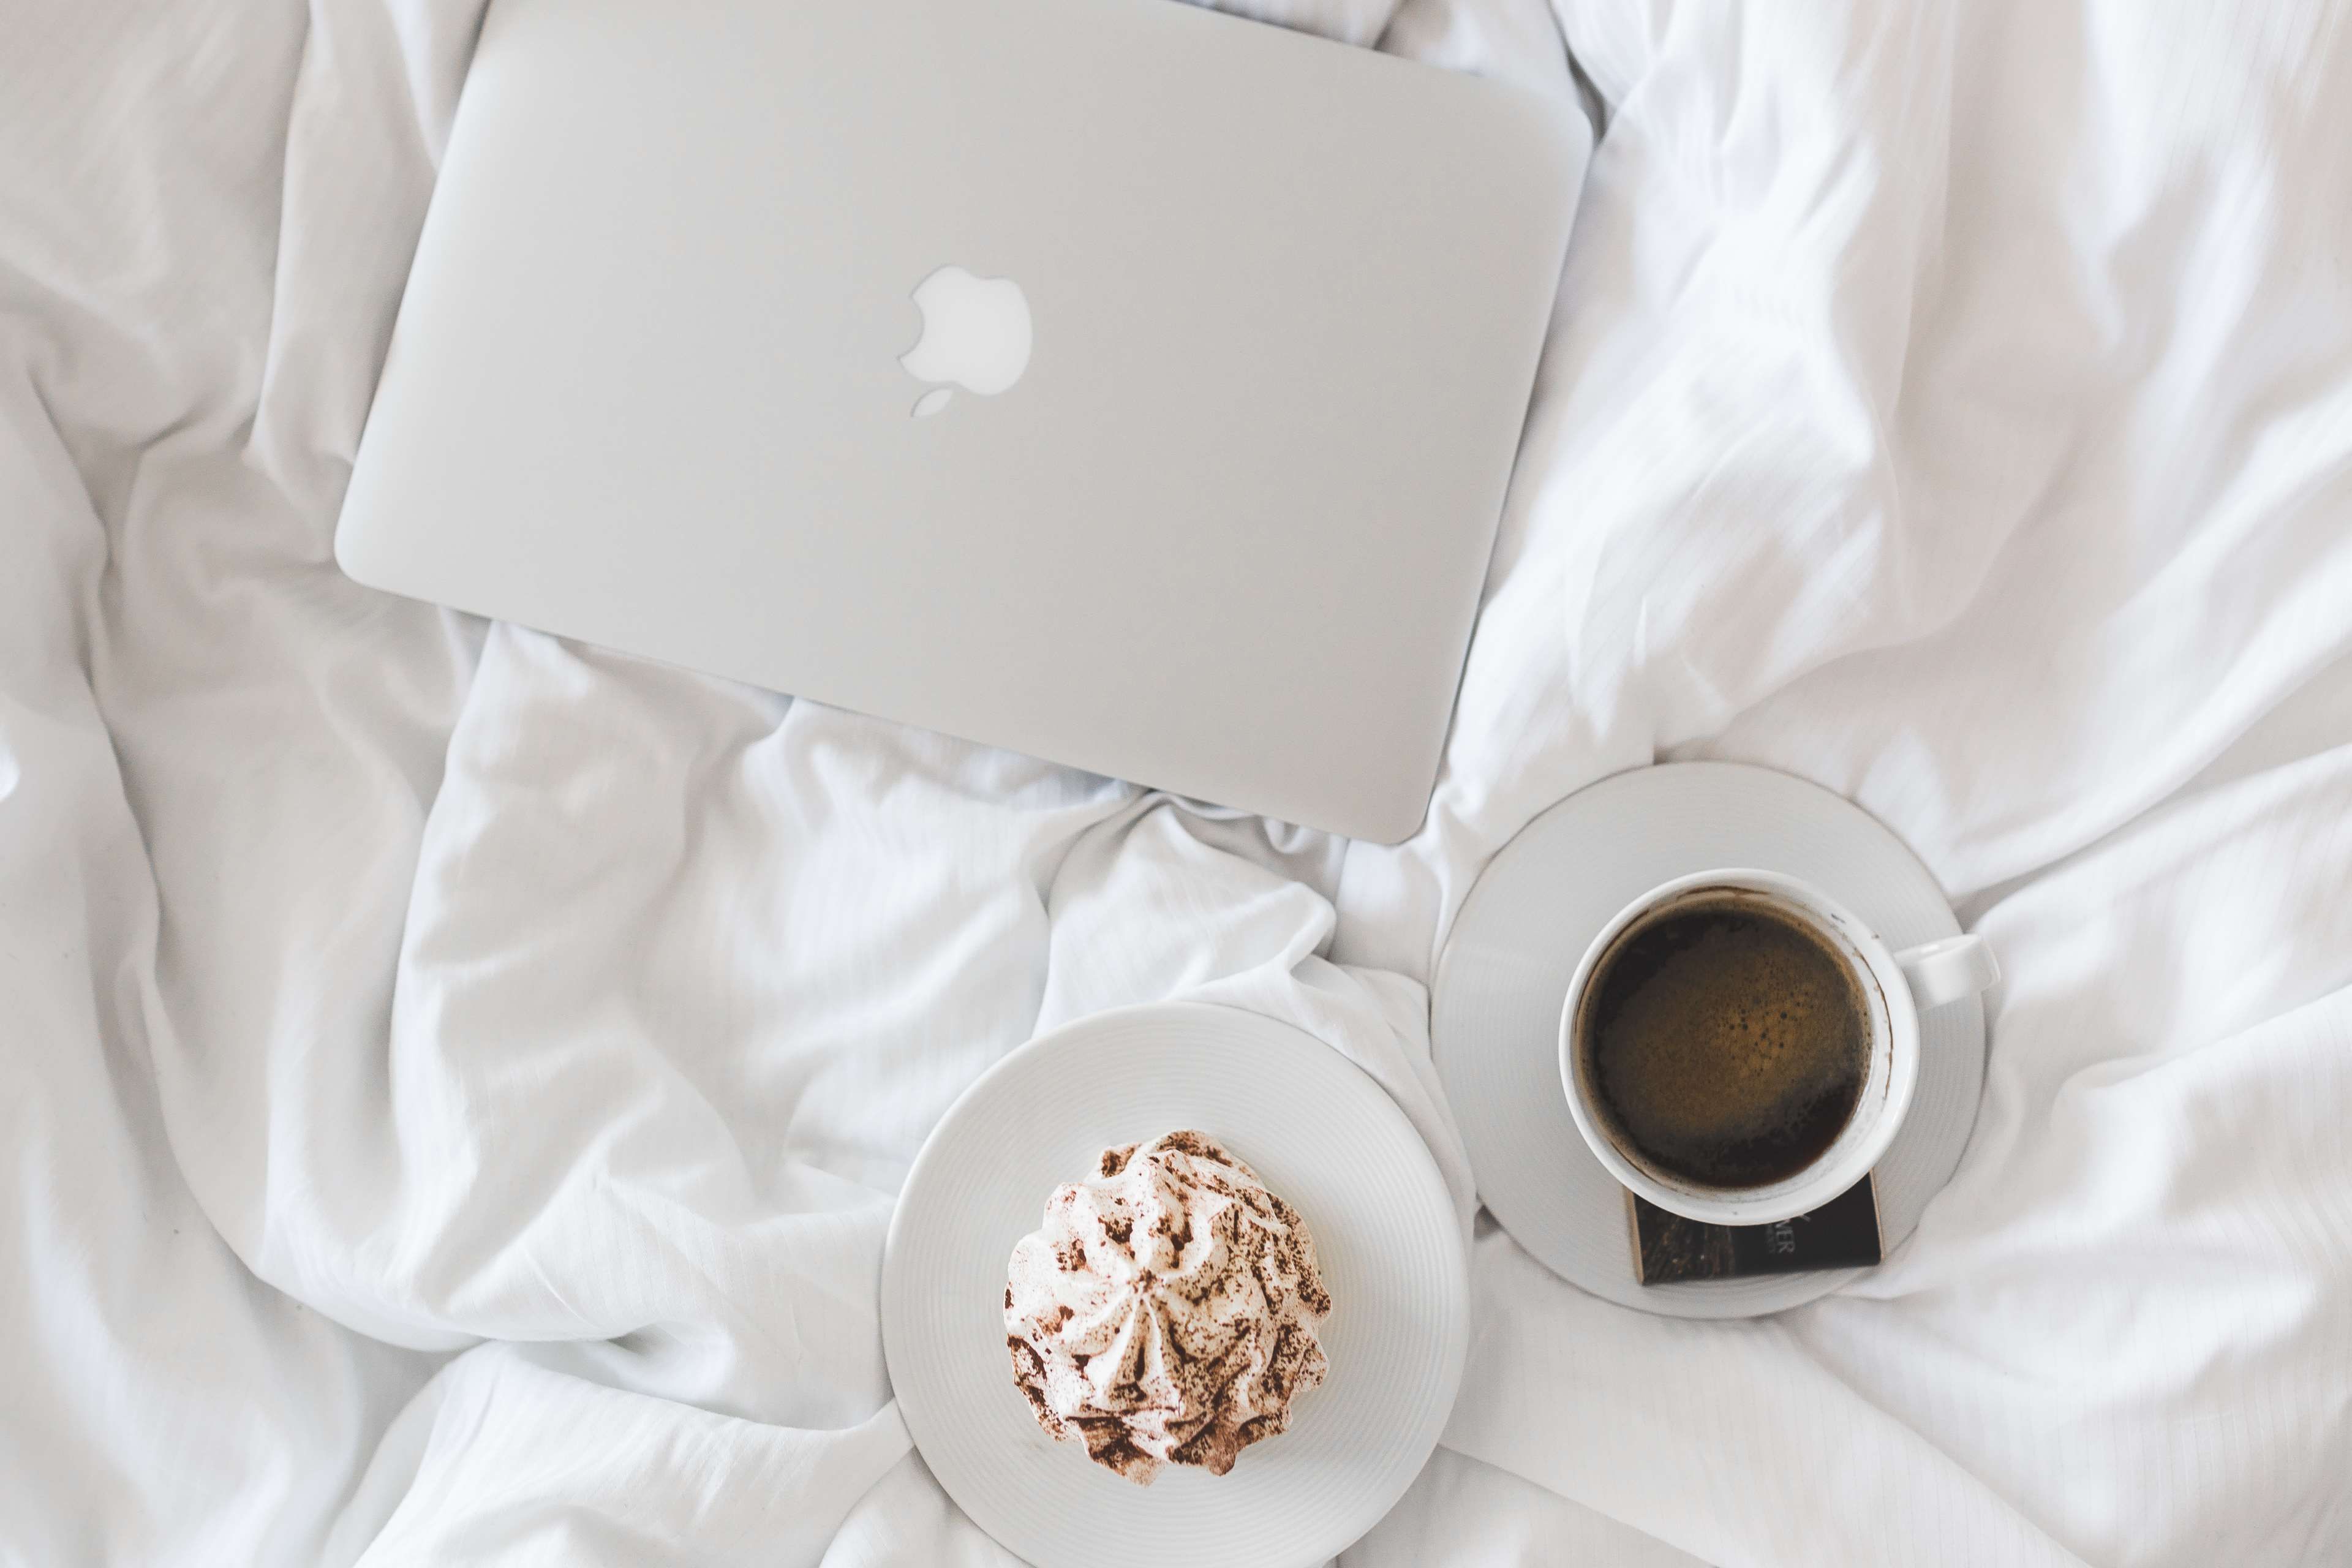 apple, bed, bedroom, break, breakfast, cake, clean, coffee, computer, cup, drink, home, laptop, learning, lifestyle, macbook, minimal, morning, read, study, success, tech, technology, top view, white, work 4k wallpaper